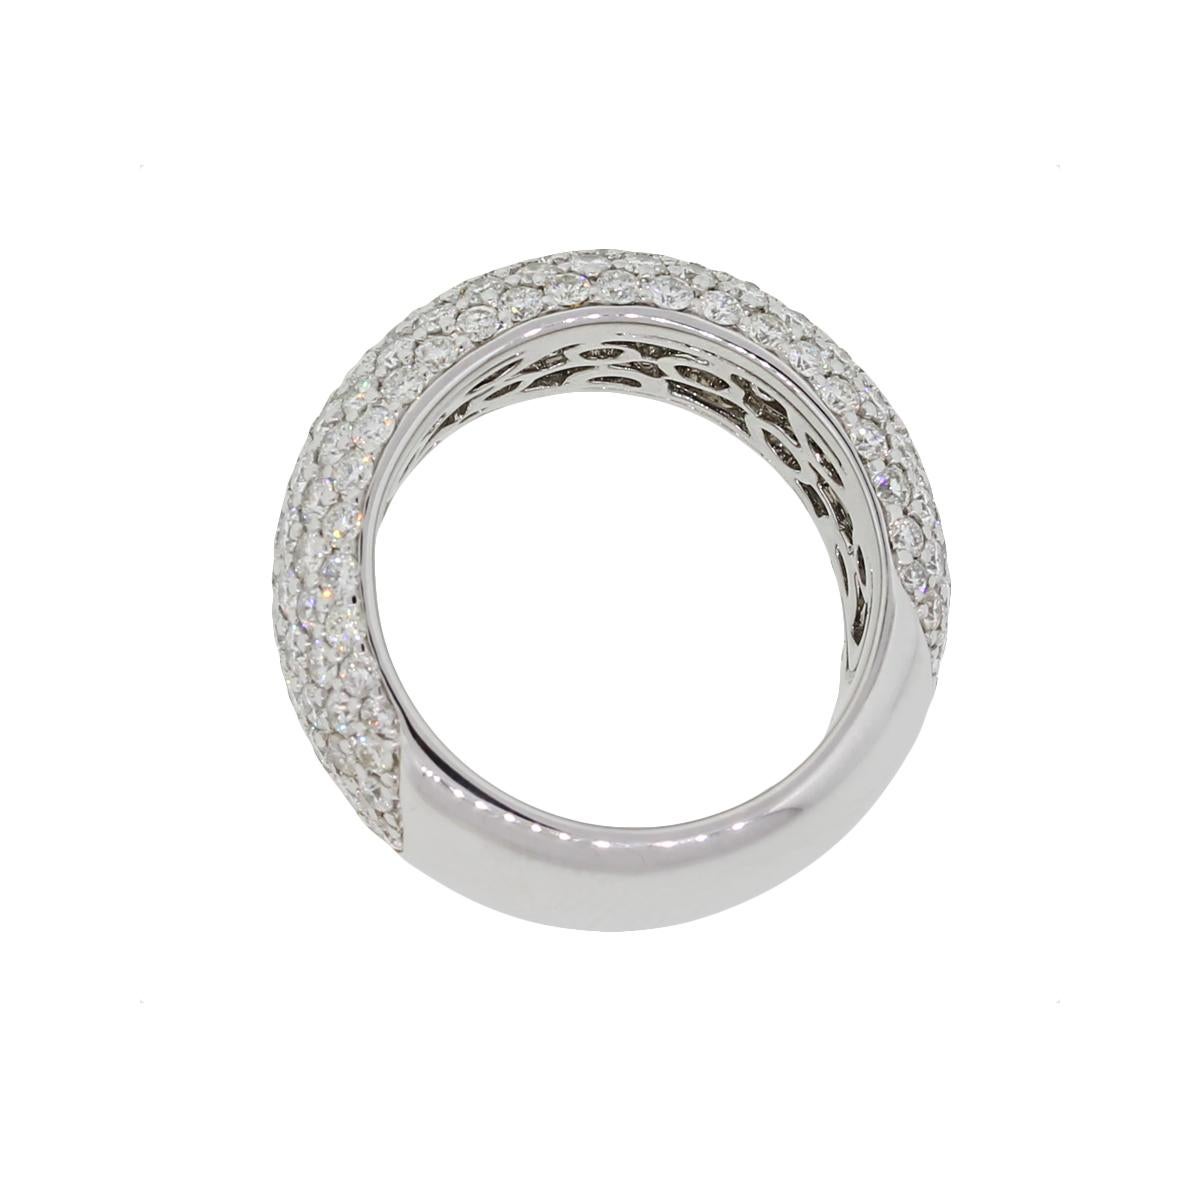 Material: 18k white gold
Diamond Details: Approximately 3.67ctw of round brilliant diamonds. Diamonds are G/H in color and VS in clarity
Ring Size: 7.50
Ring Measurements: 0.97″ x 0.41″ x 0.97″
Total Weight: 15.5g (10dwt)
Additional Details: This